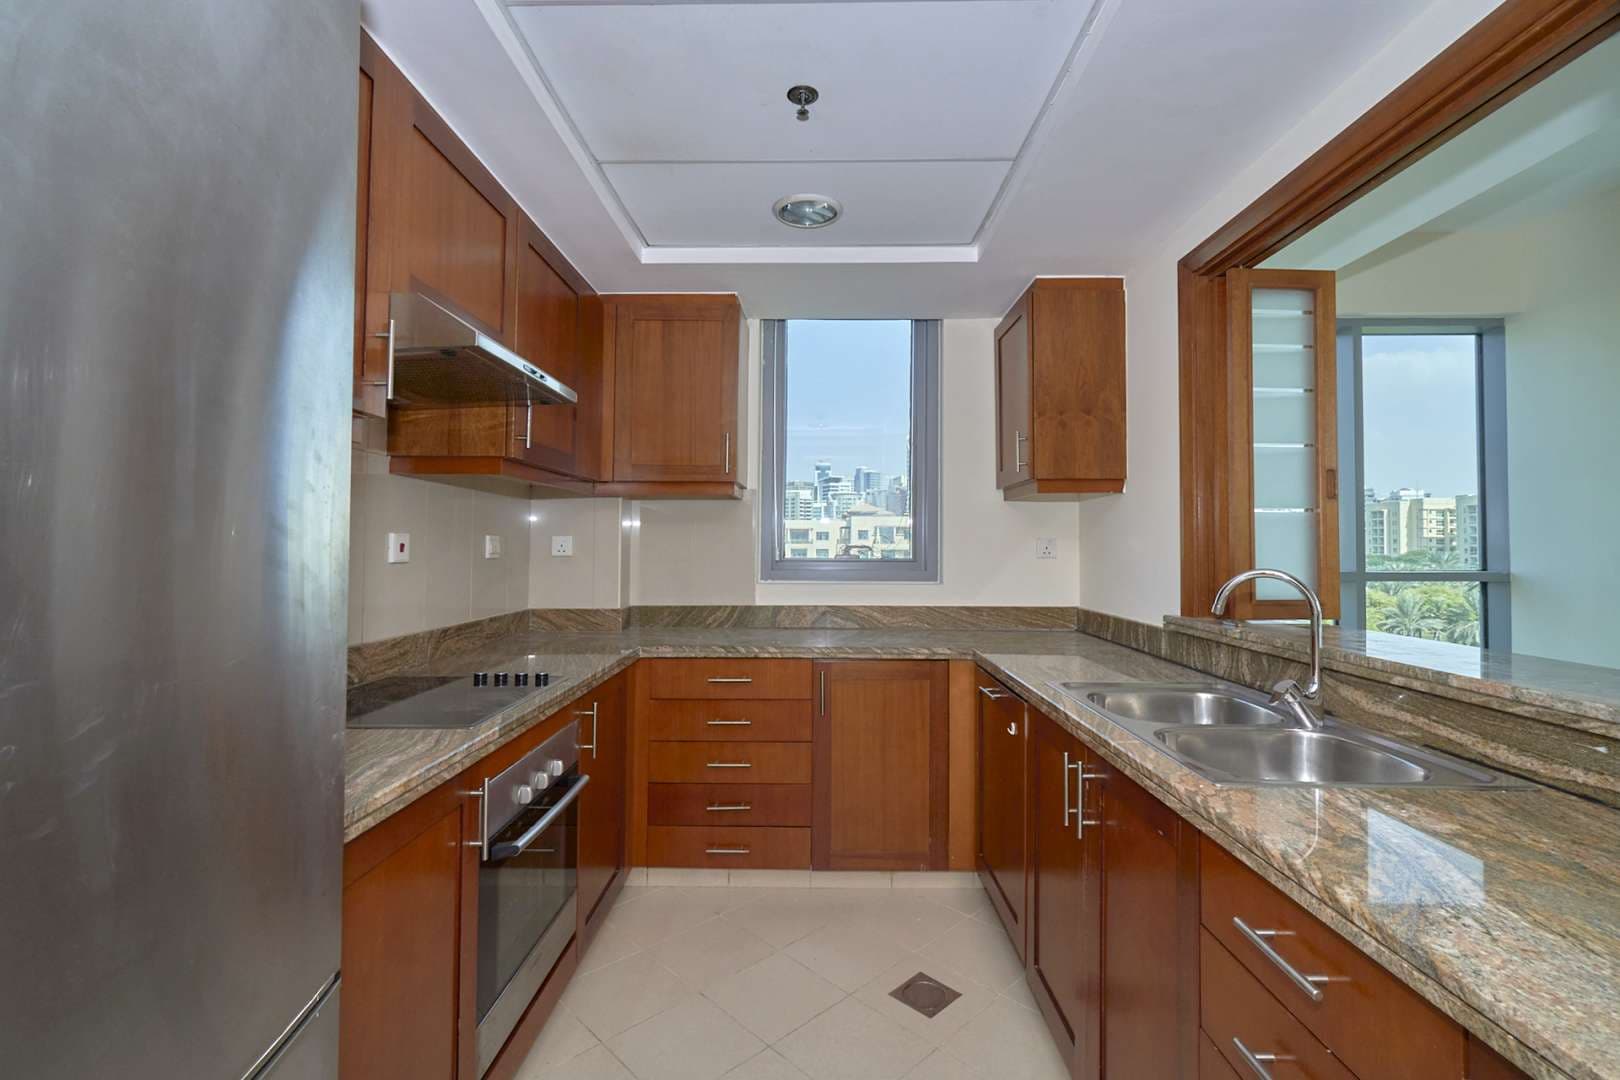 1 Bedroom Apartment For Rent Golf Towers Lp09053 25464927e3f98c00.jpg